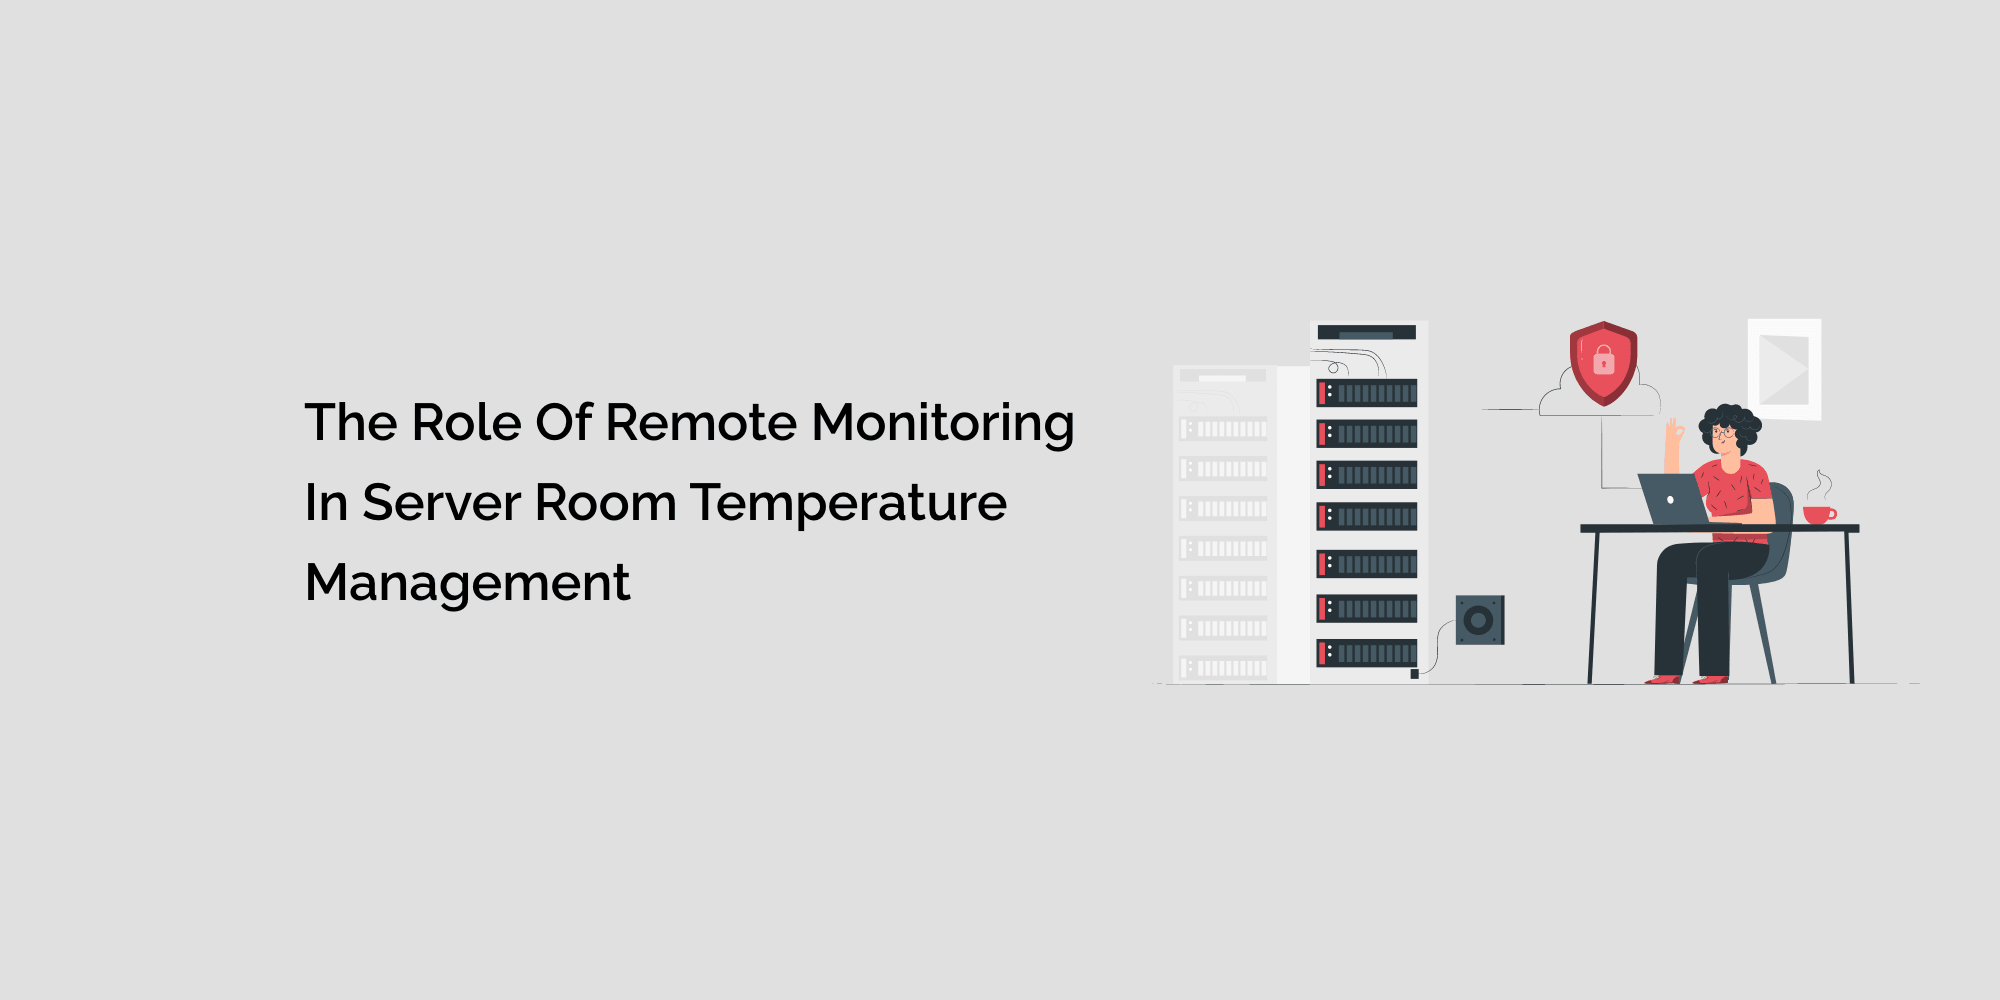 The Role of Remote Monitoring in Server Room Temperature Management